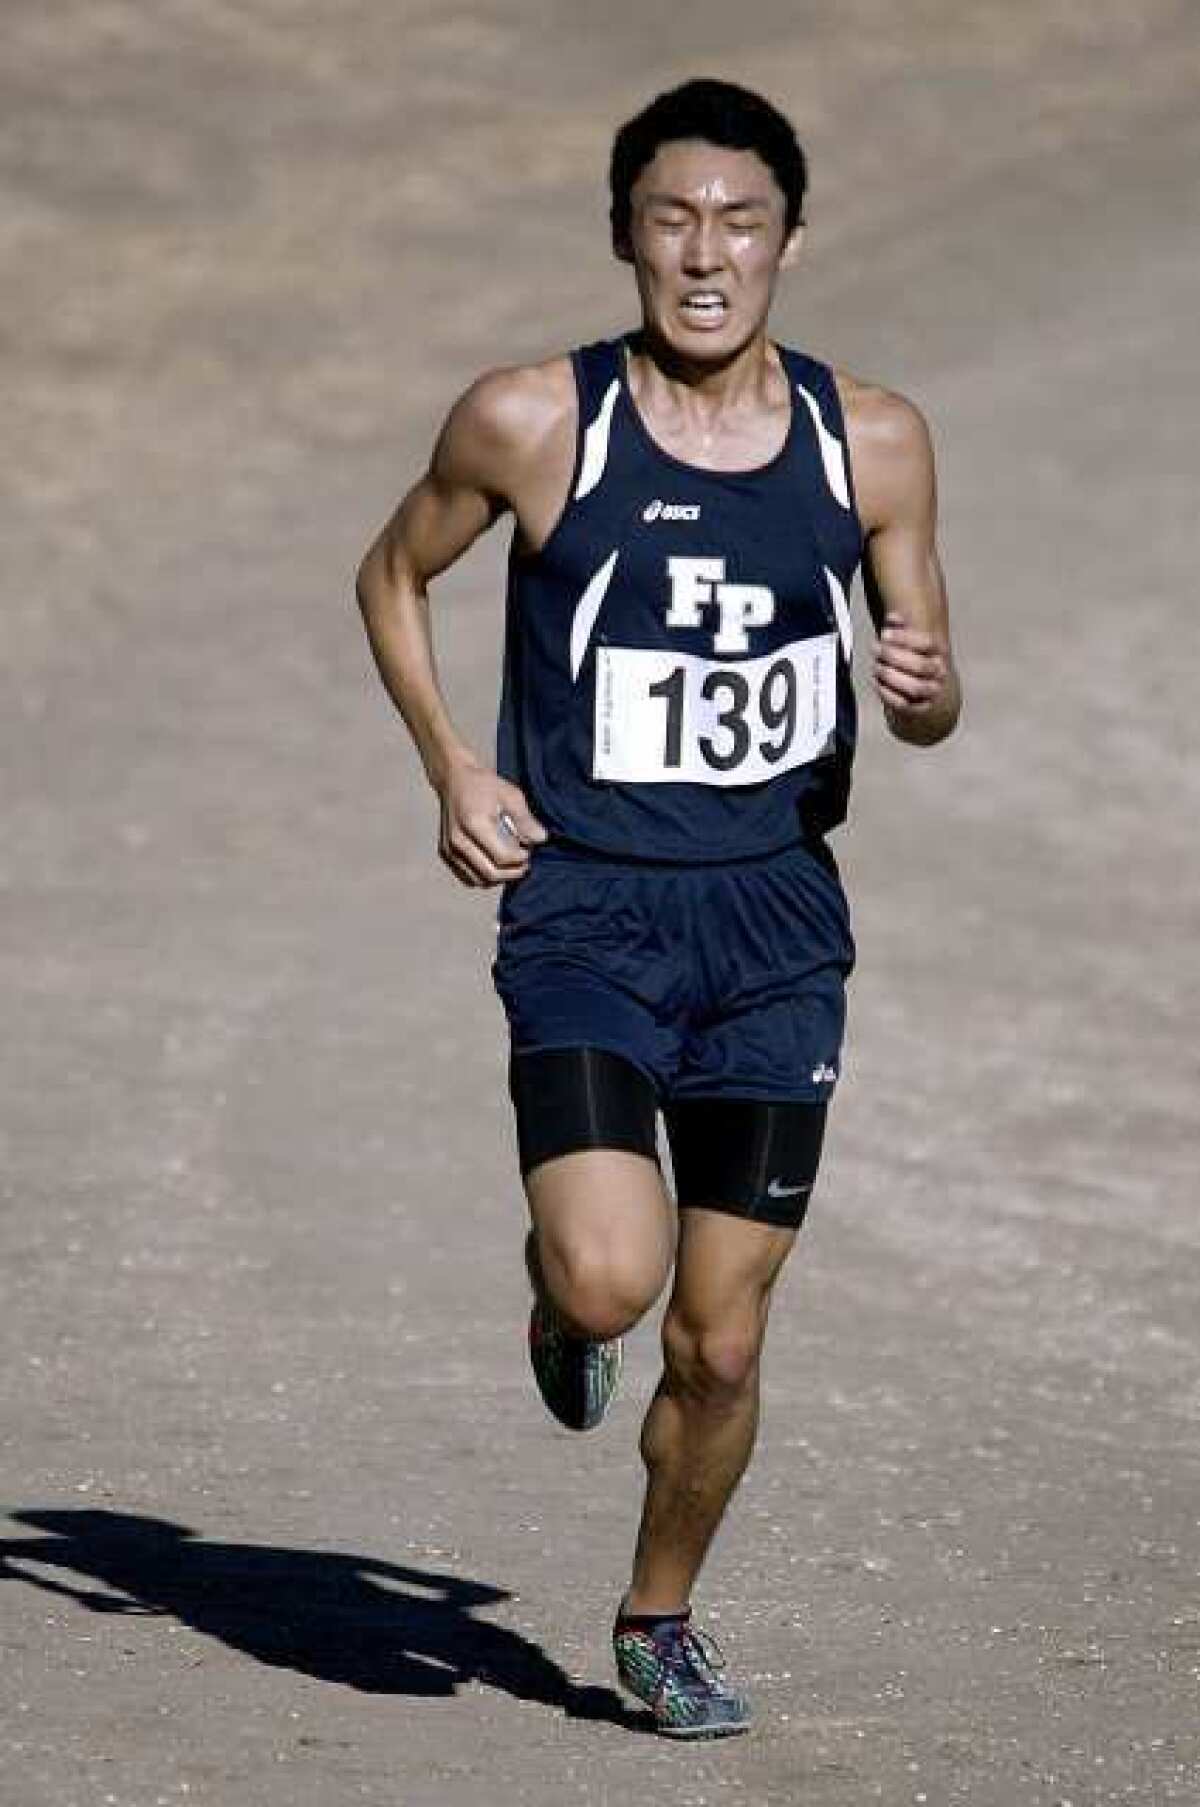 ARCHIVE PHOTO: Flintridge Prep finished second at the CIFSS Cross-Country Divisional Championships despite placing four runners in the top 20, led by sixth-place Aaron Sugimoto.